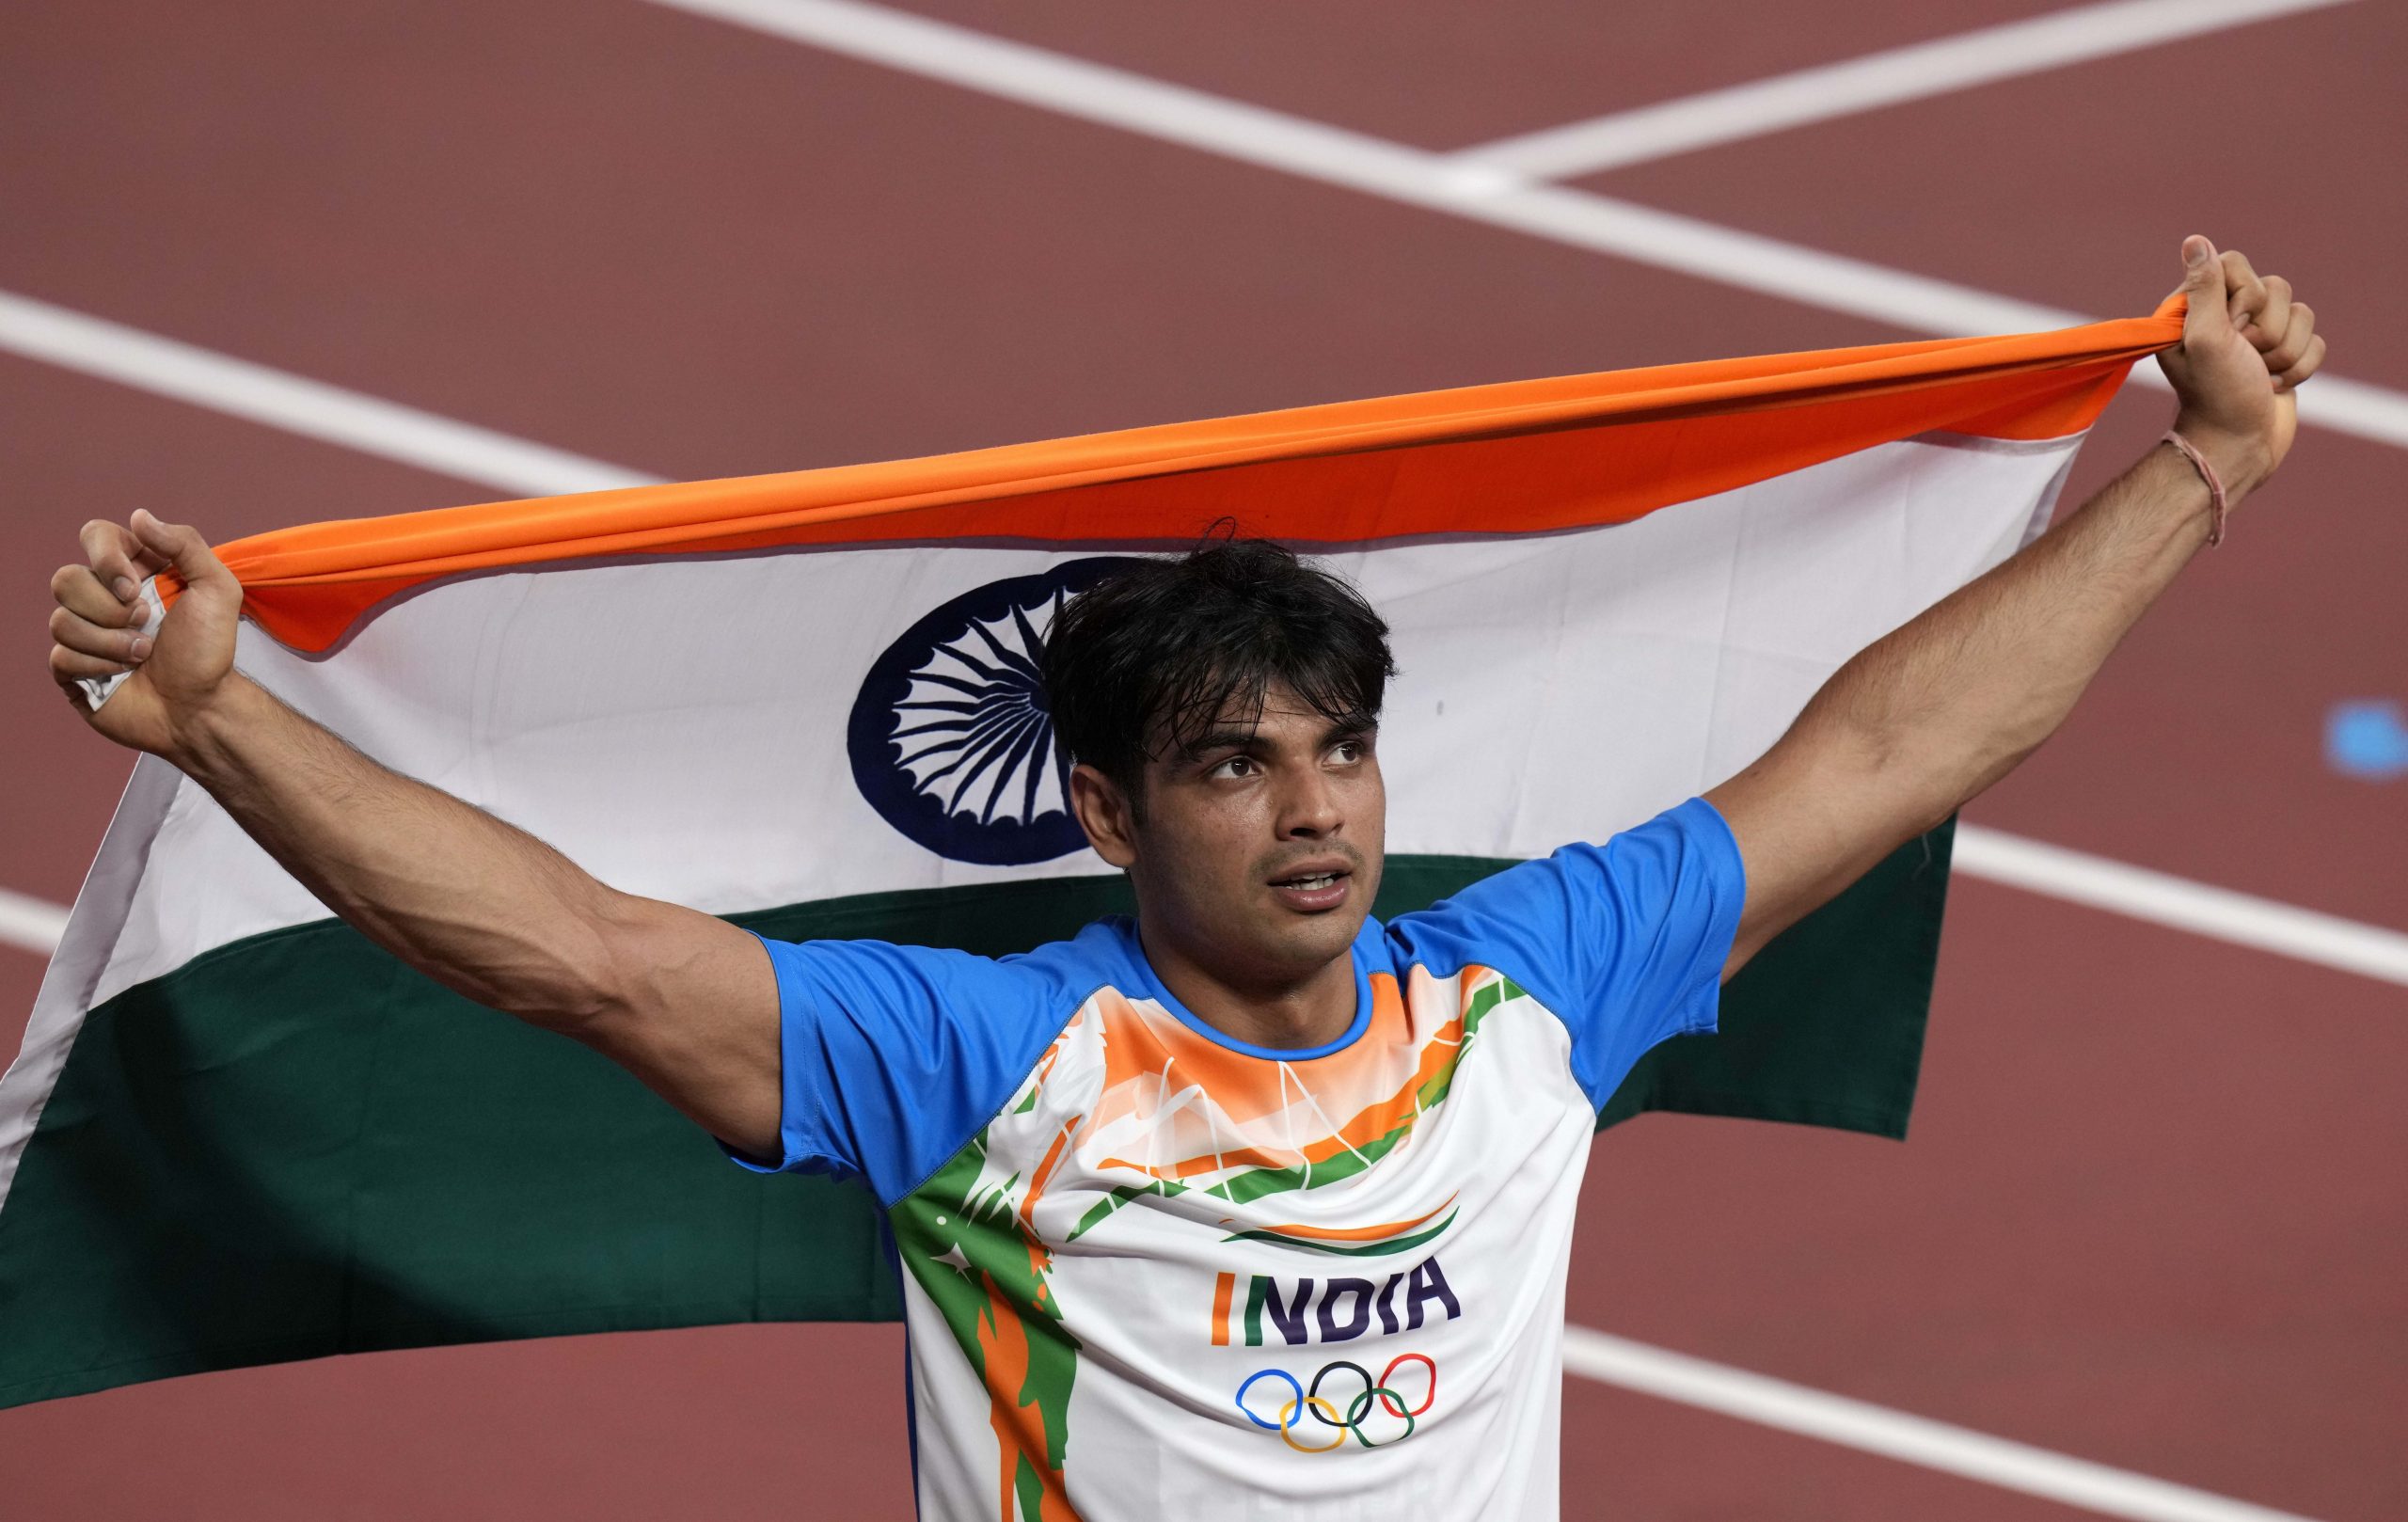 Watch: Neeraj Chopra reverently folds Indian flag after victory lap